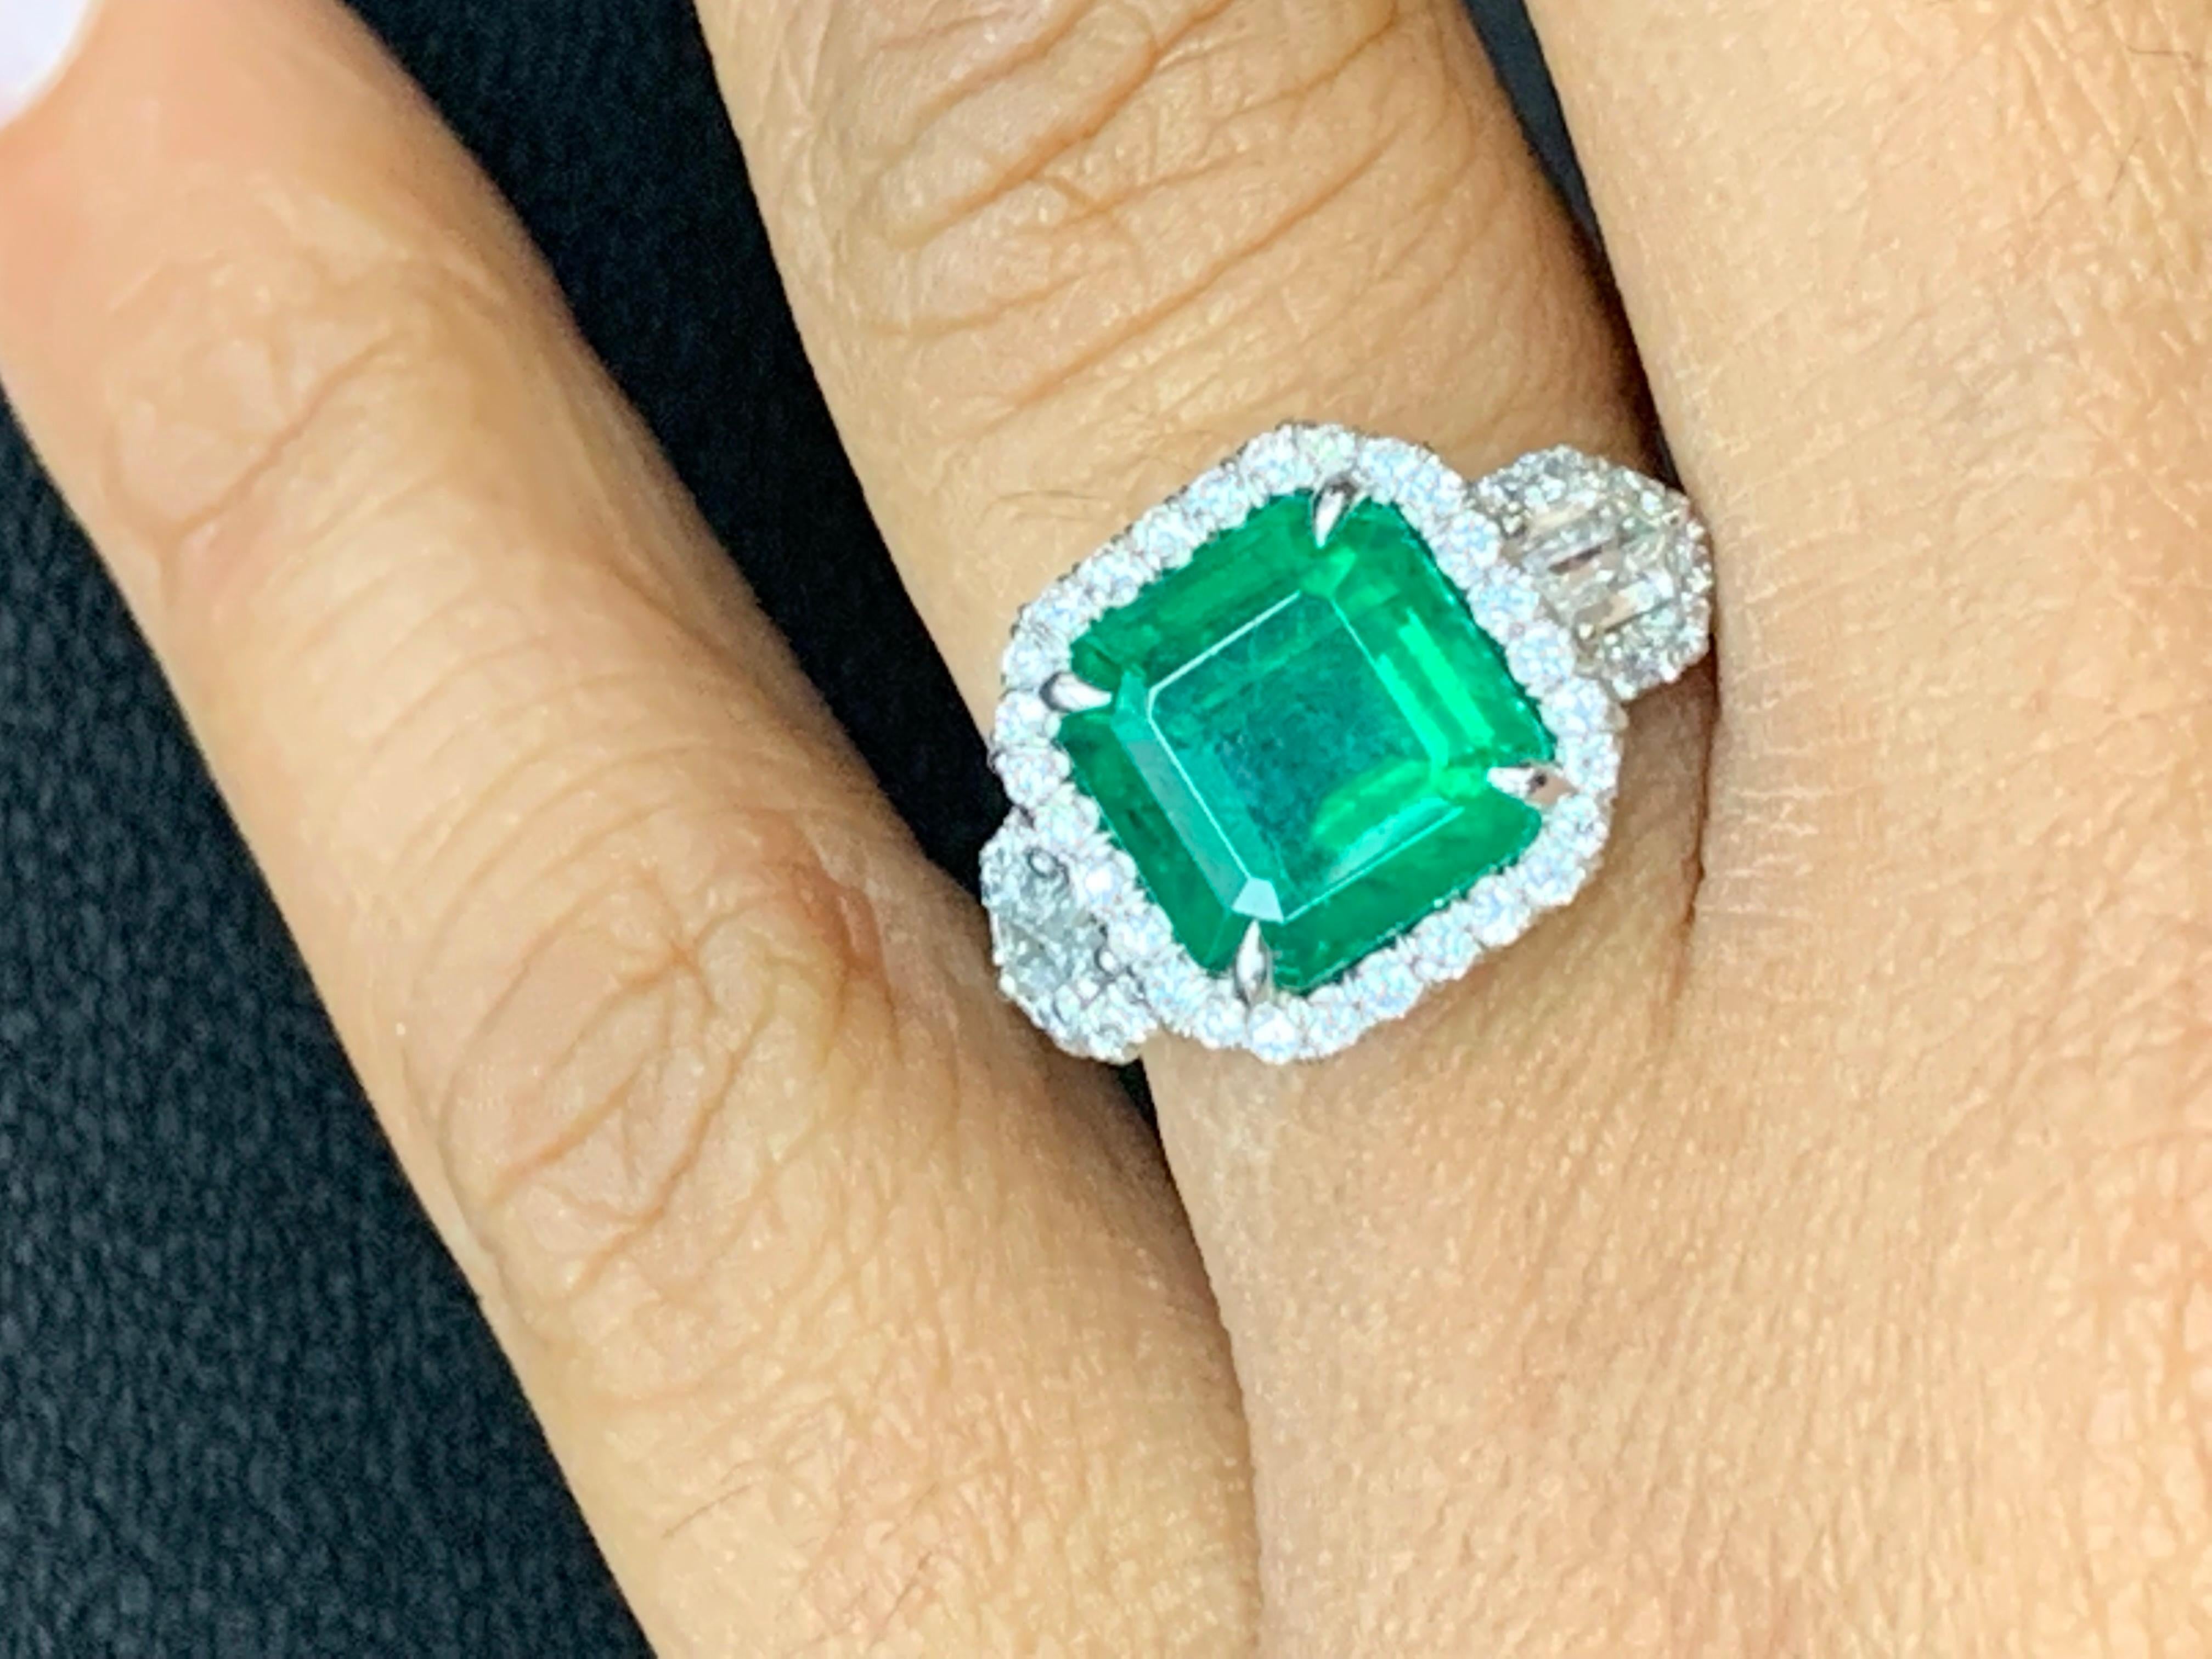 An antique style engagement ring showcasing a 3.69-carat emerald cut emerald, surrounded by a row of brilliant cut diamonds and two brilliant bullet diamonds on either side. The piece is finished with a brilliant diamond halo and is set in an